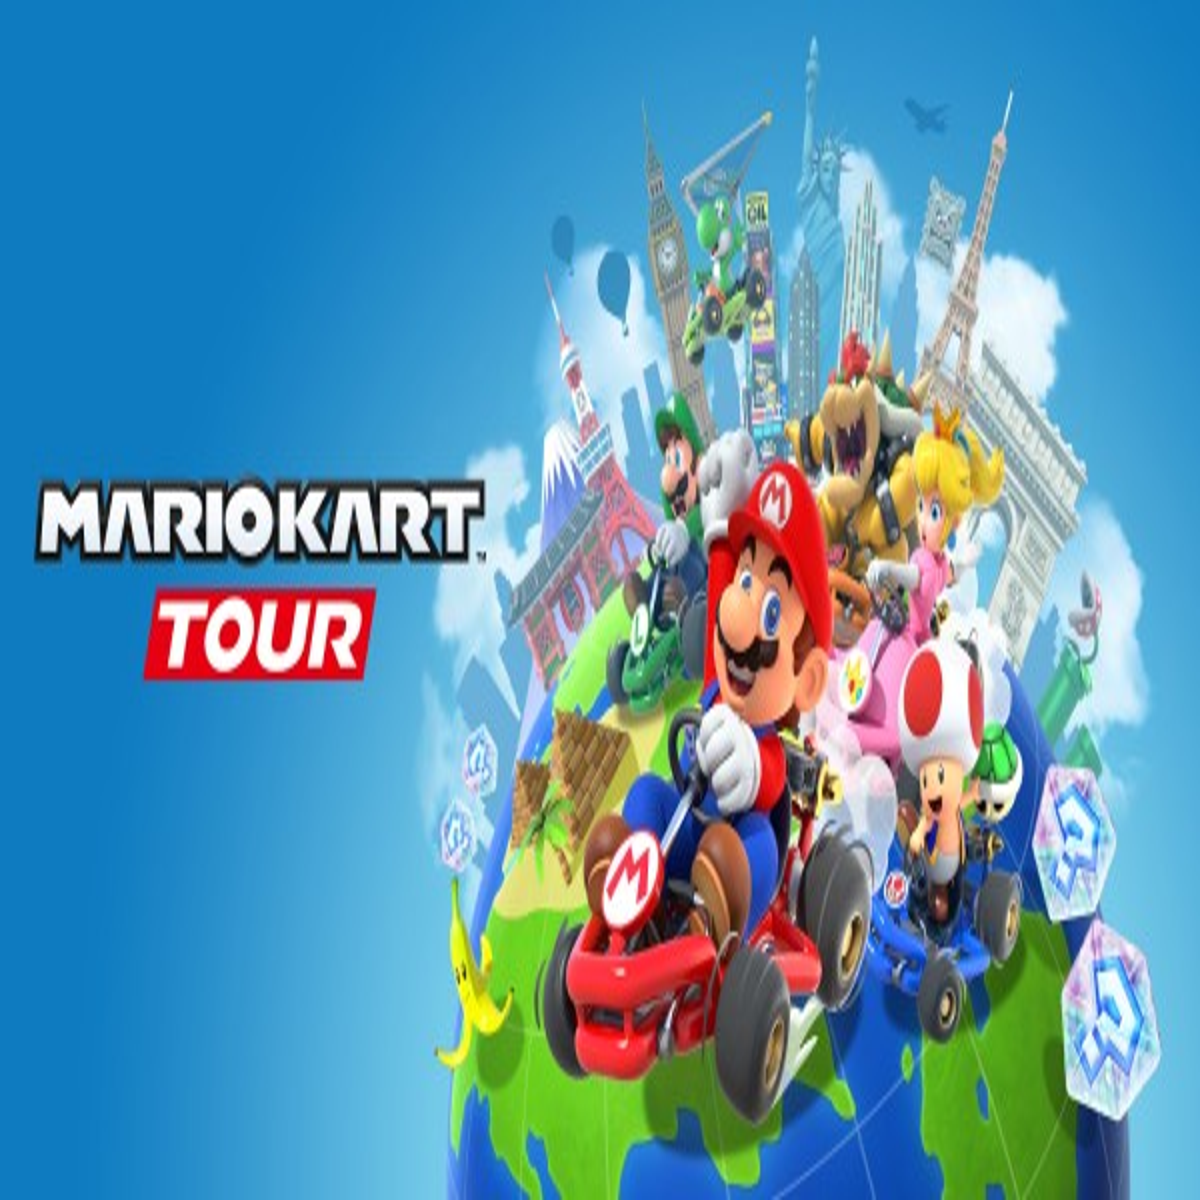 Mario Kart Tour downloaded over 10m globally its first day | GamesIndustry.biz